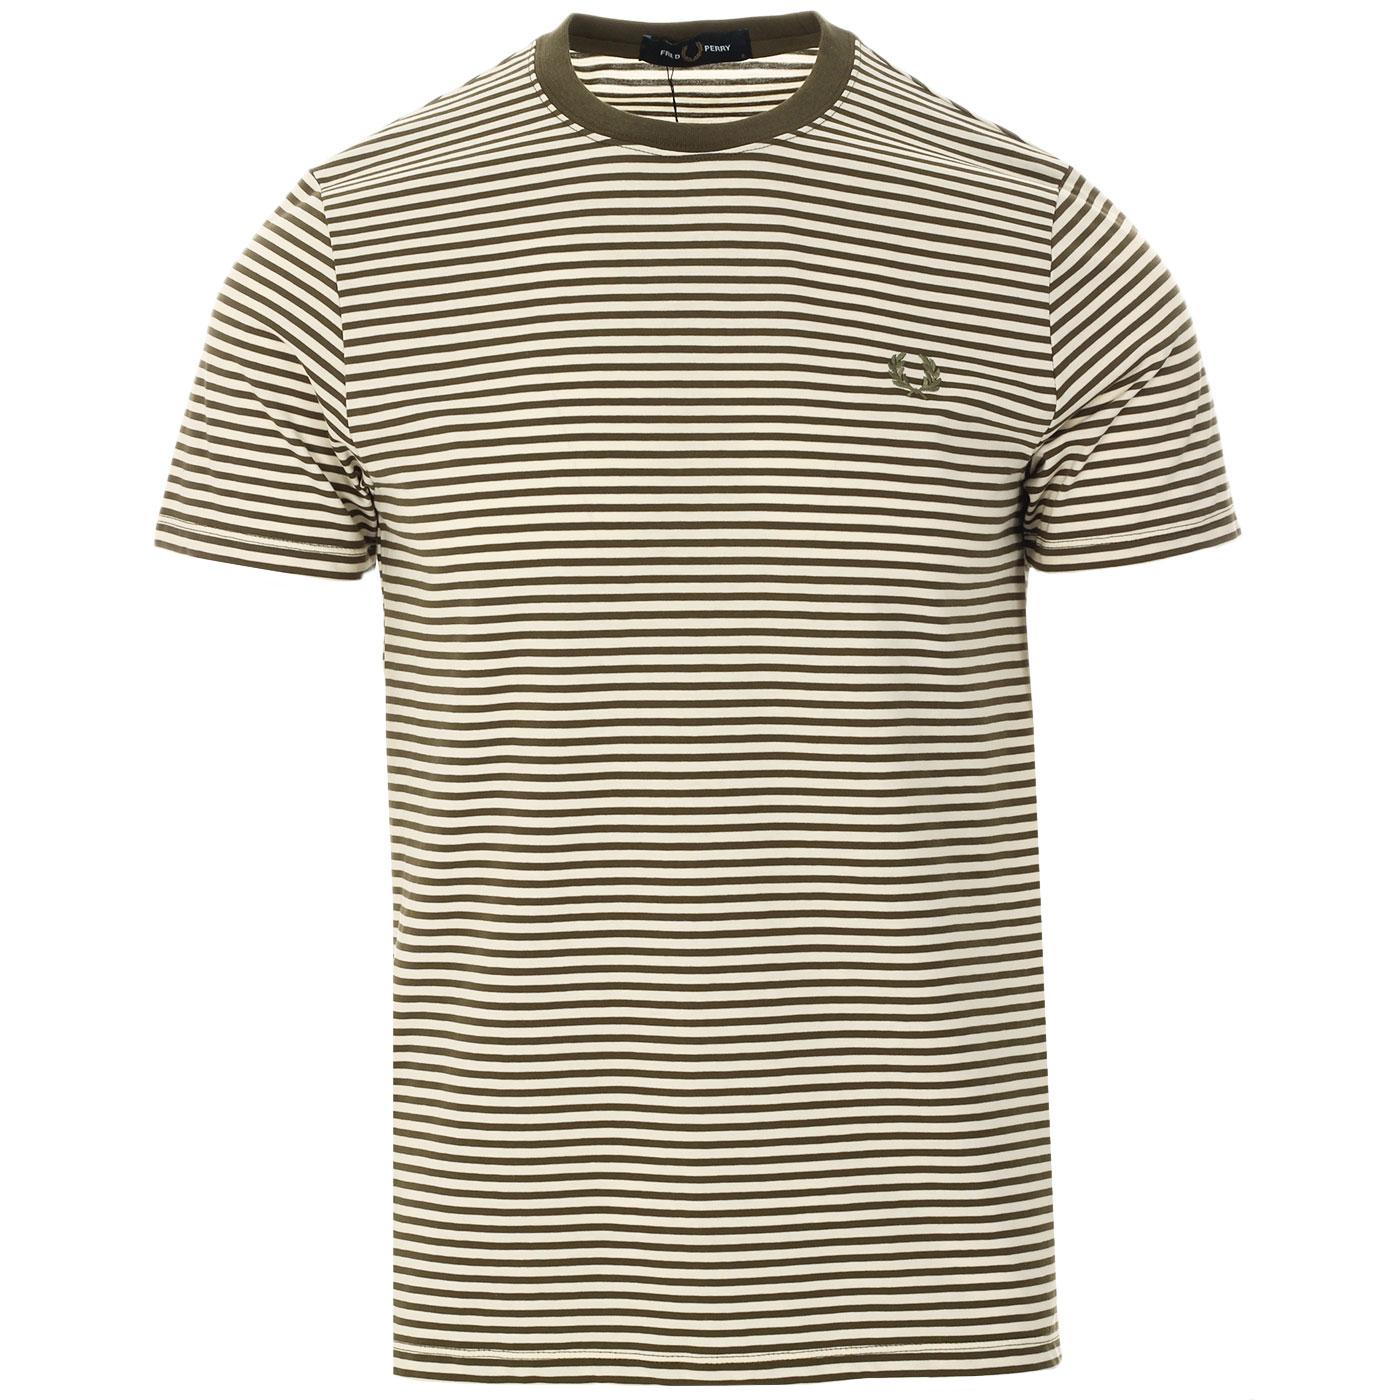 FRED PERRY Retro Mod Two Colour Stripe Tee in Military Green